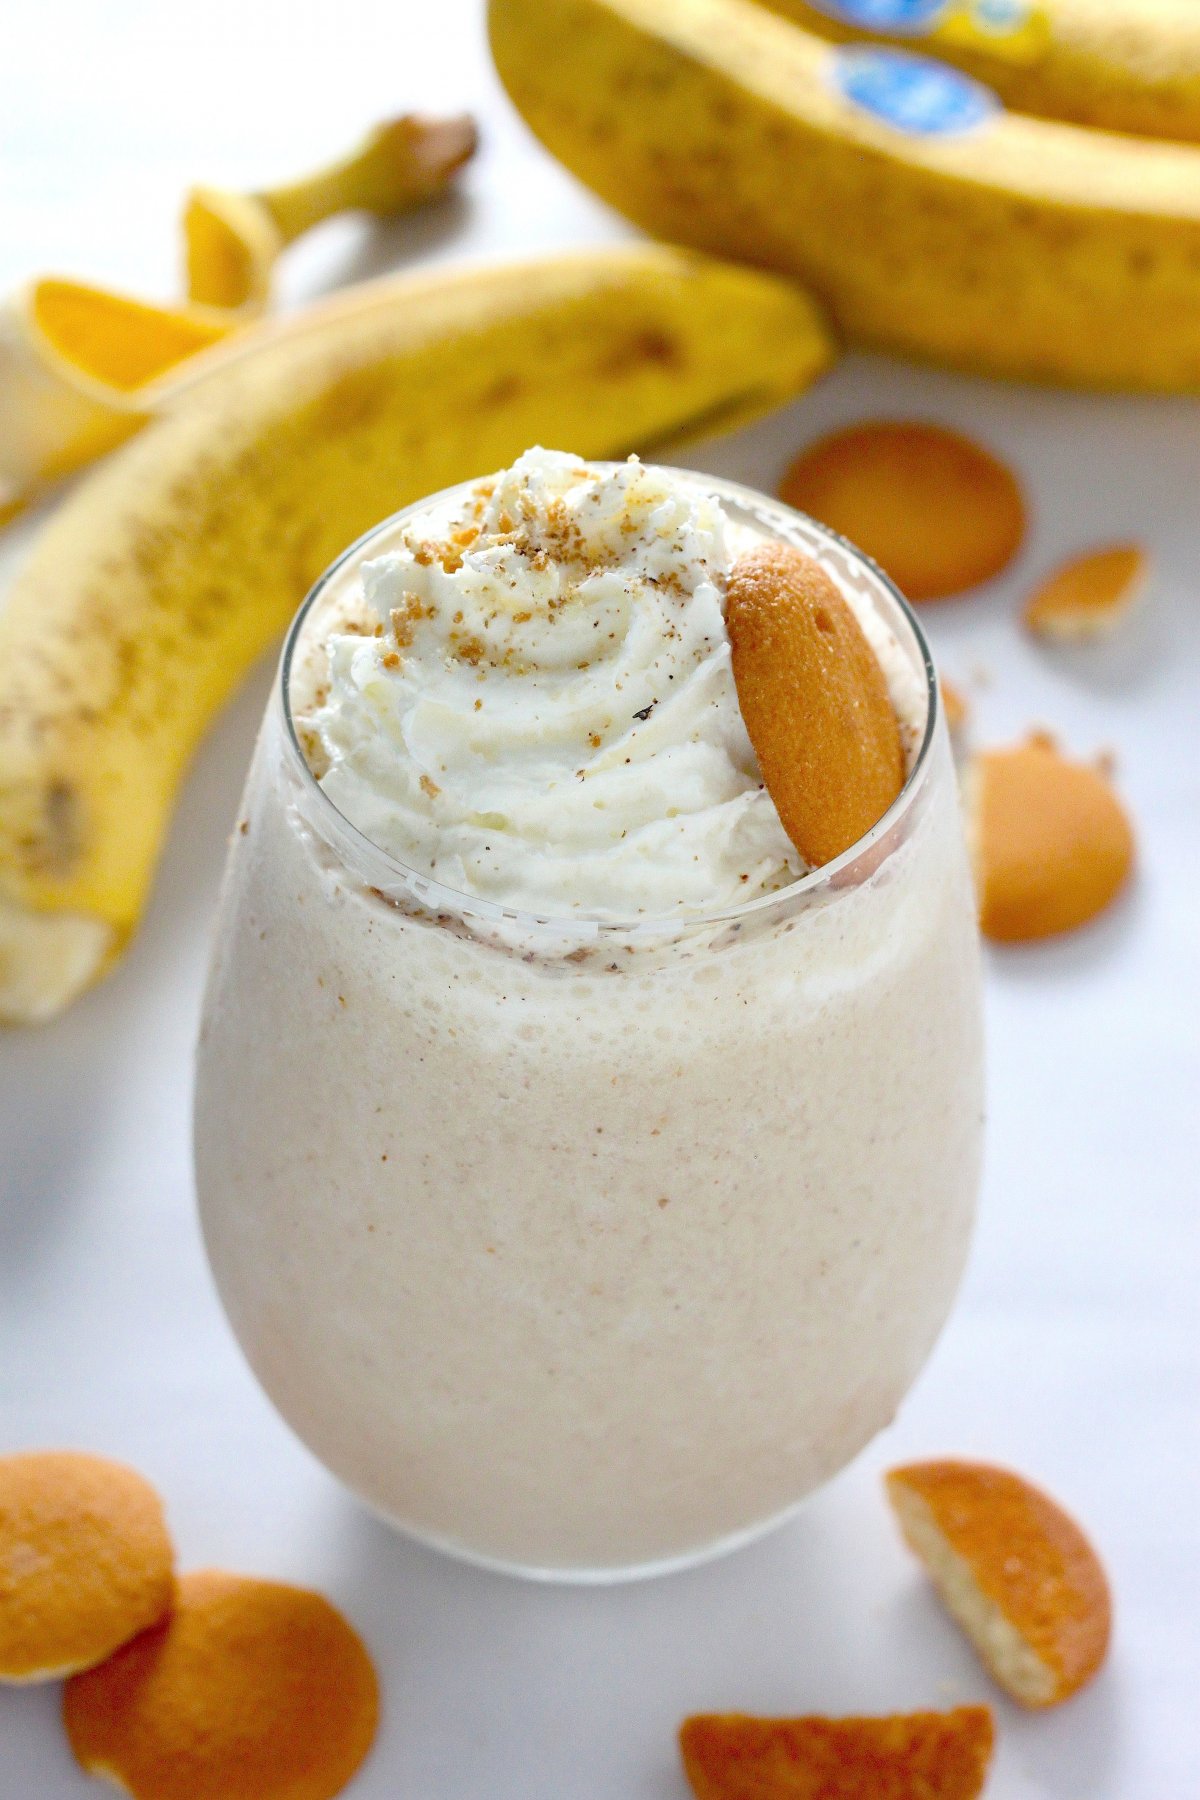 Healthy Banana Cream Pie Smoothie - Baker by Nature